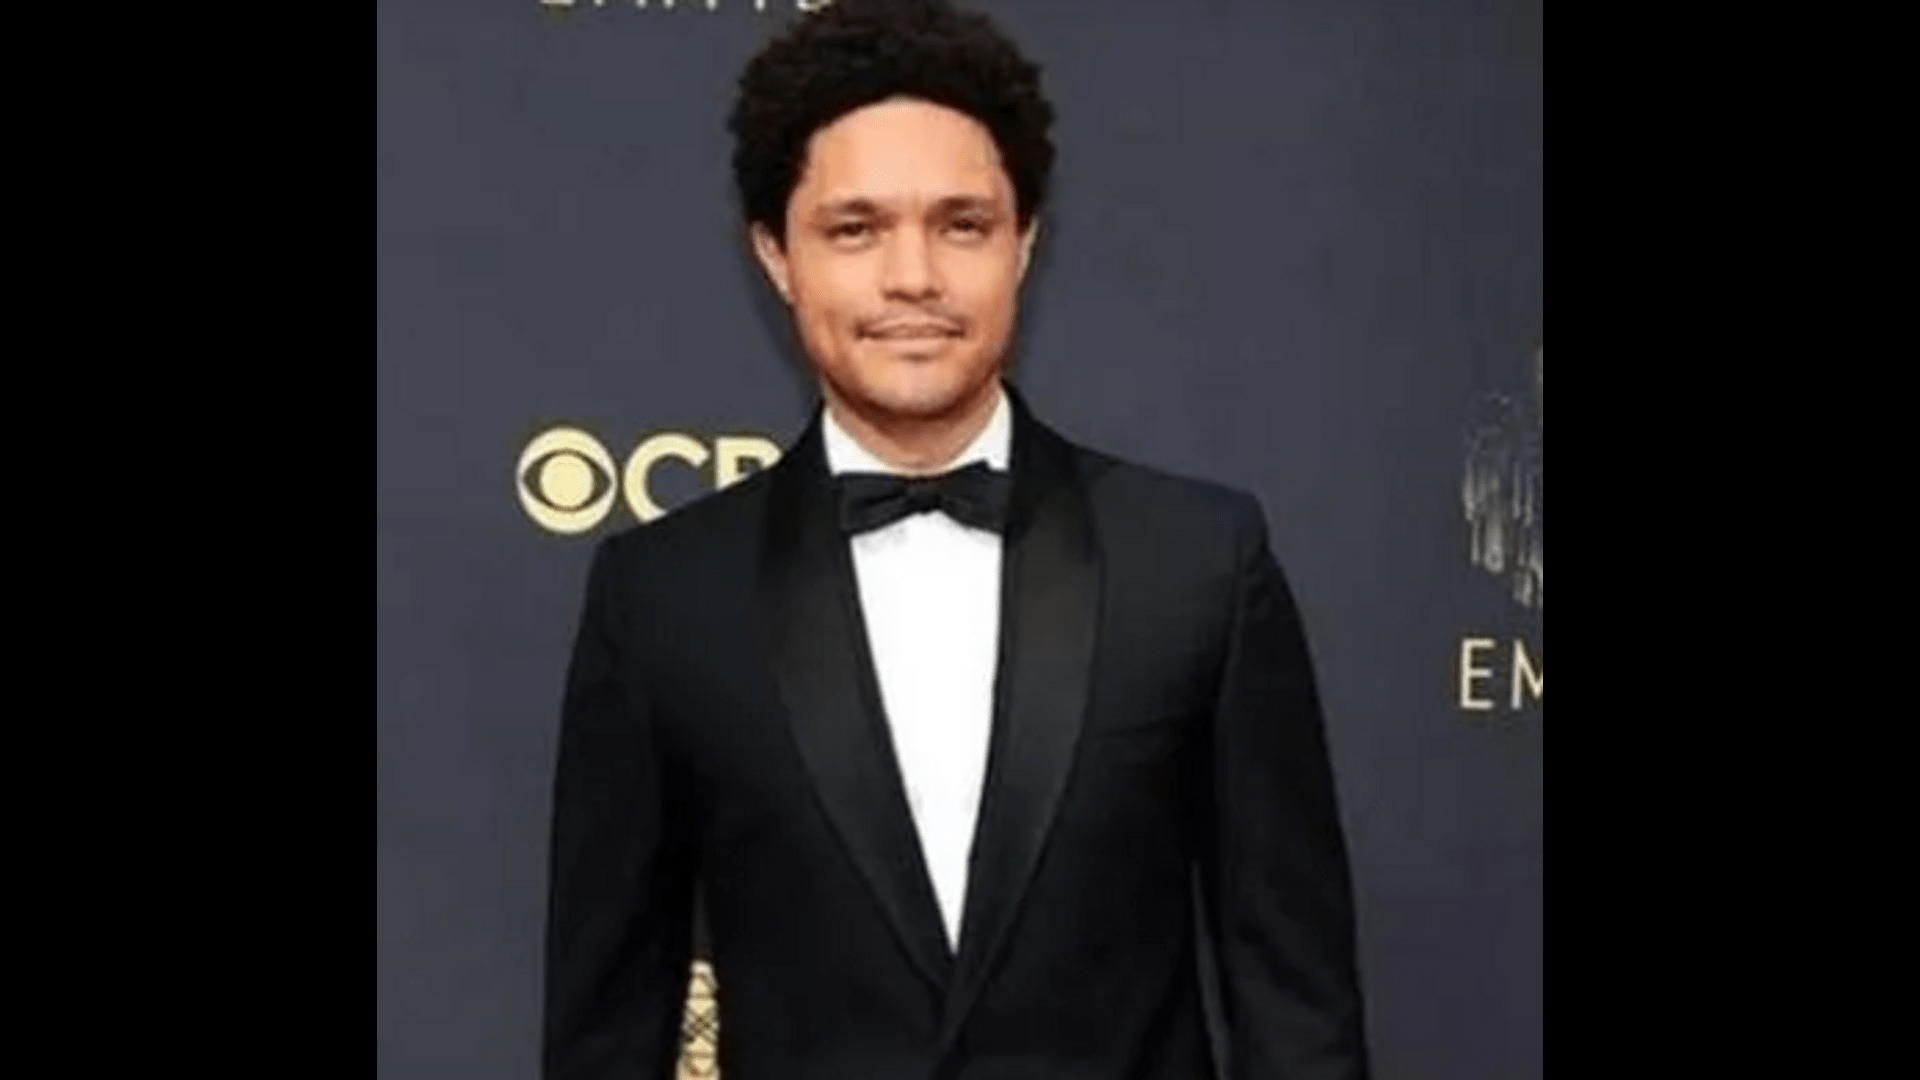 host-trevor-noah-sold-his-bel-air-mansion-for-less-than-expected